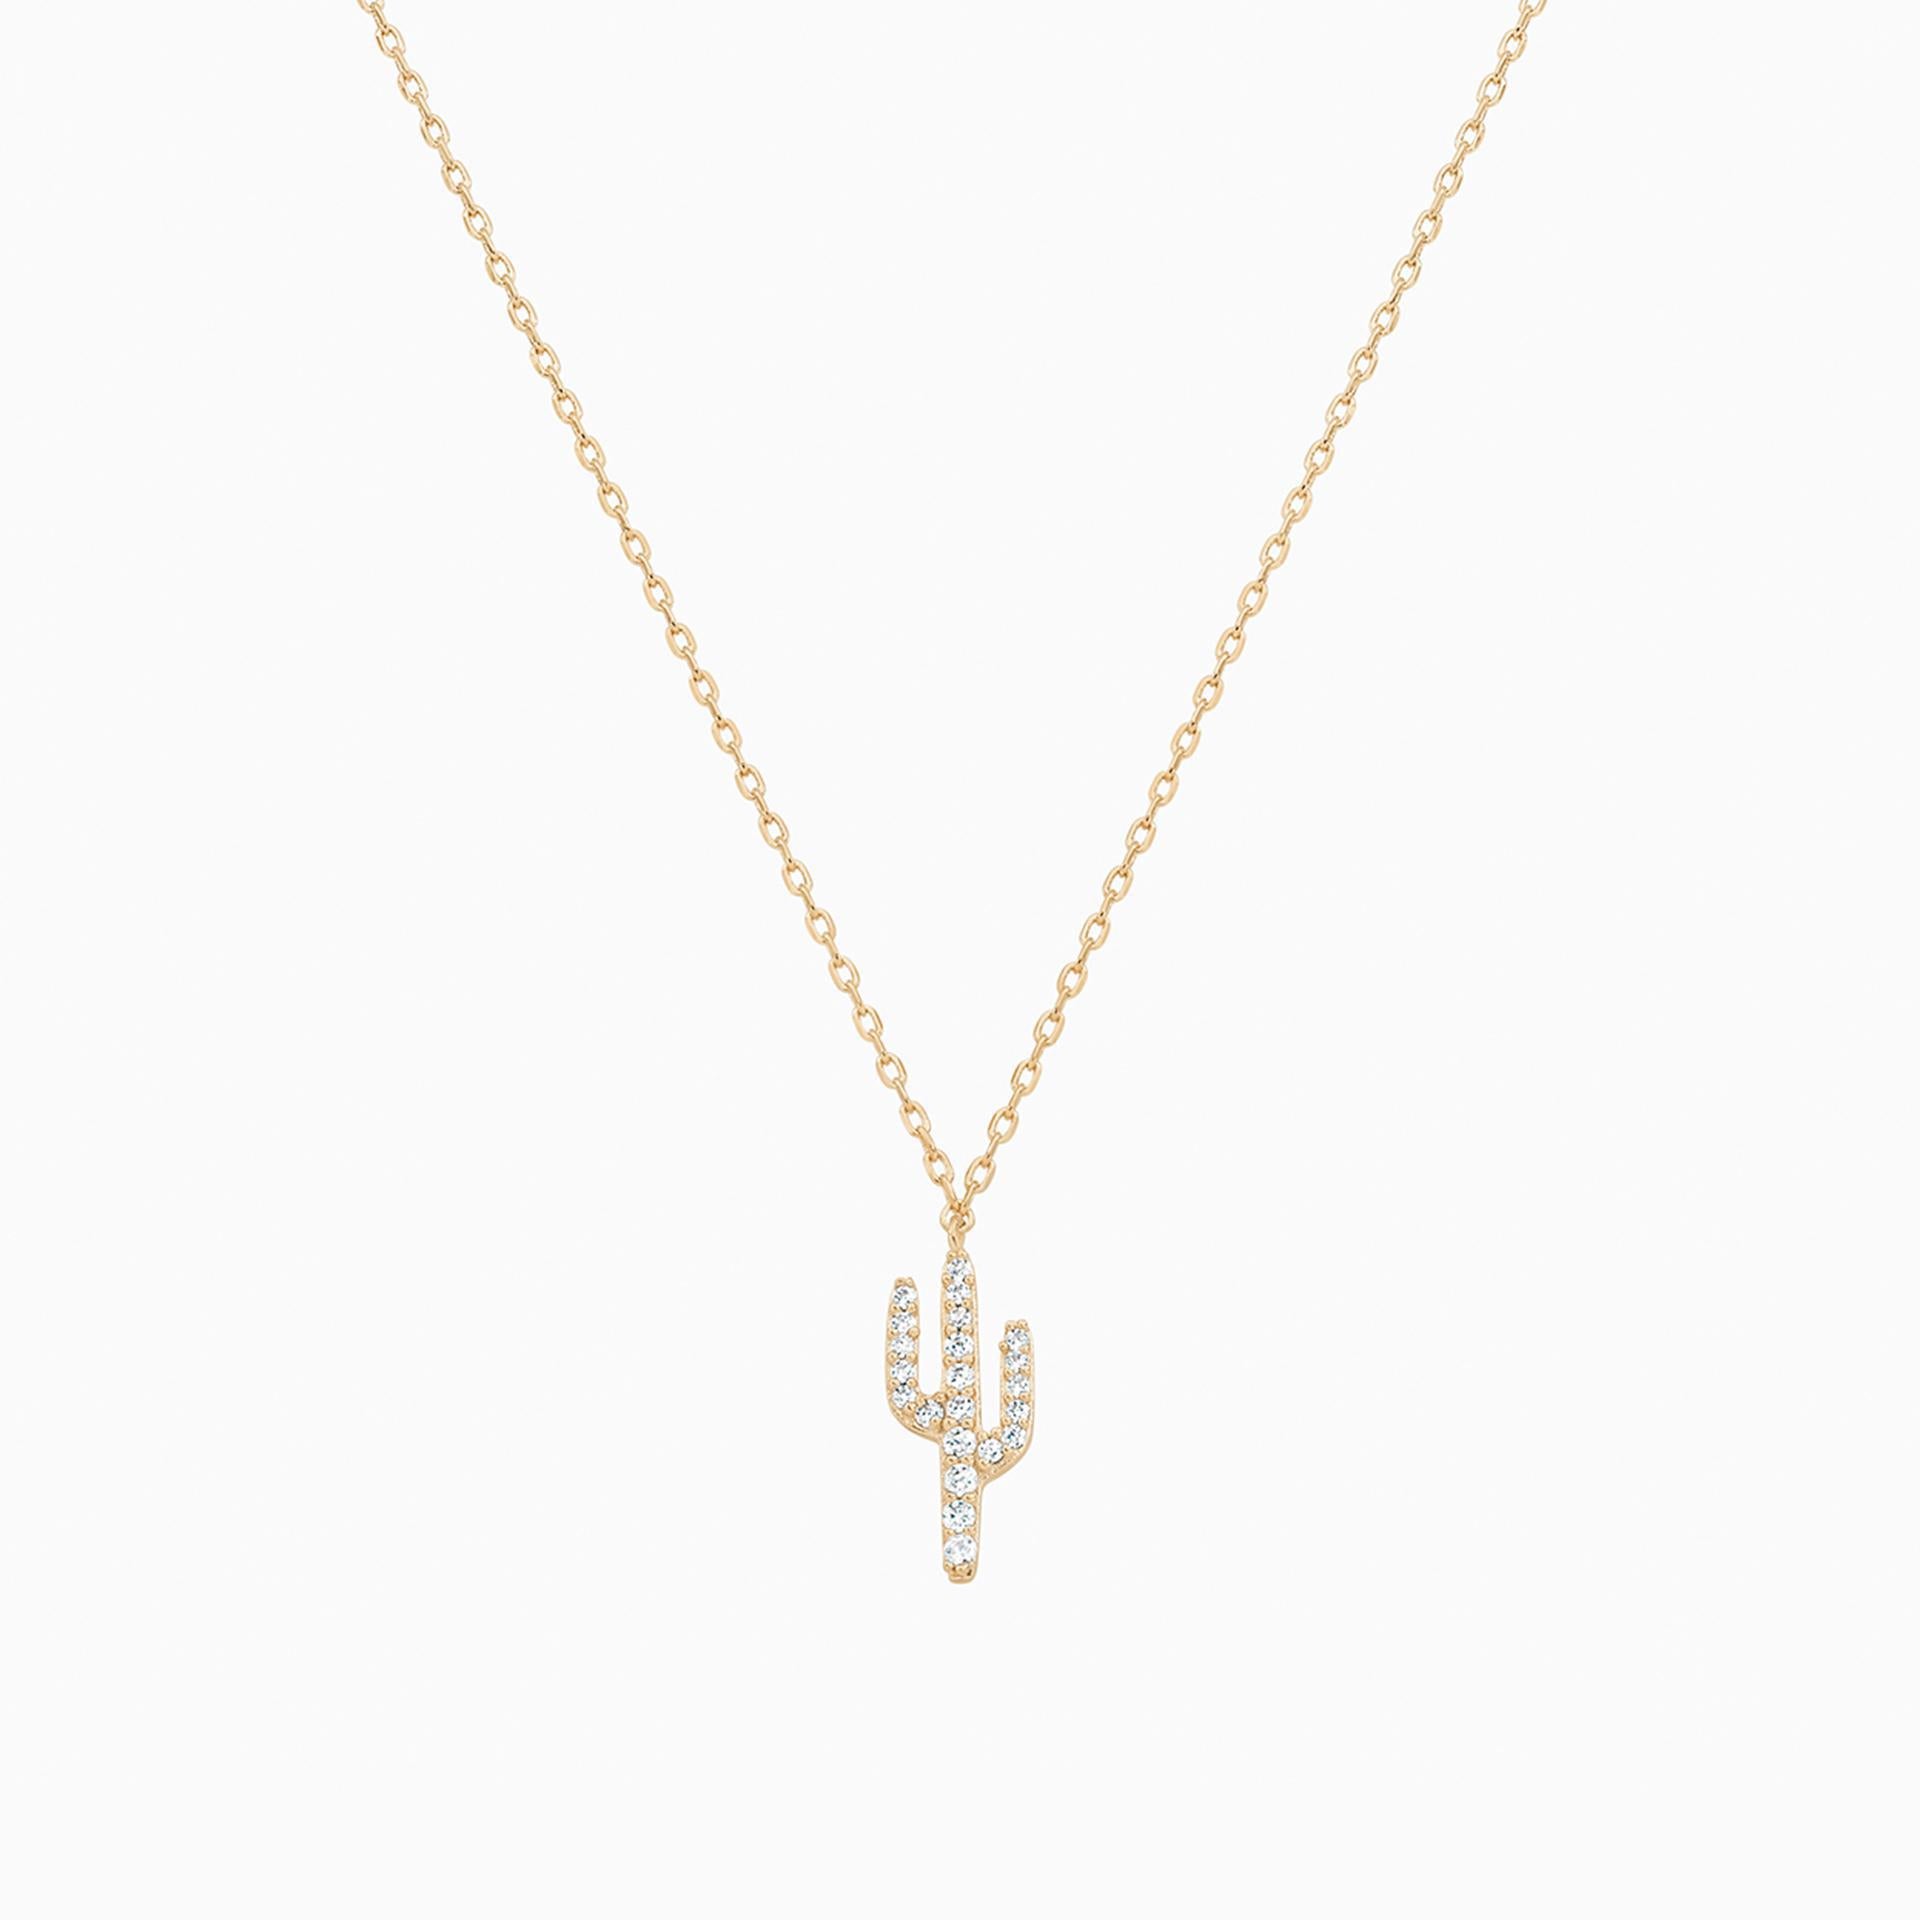 Stick Together Dainty Cactus Necklace